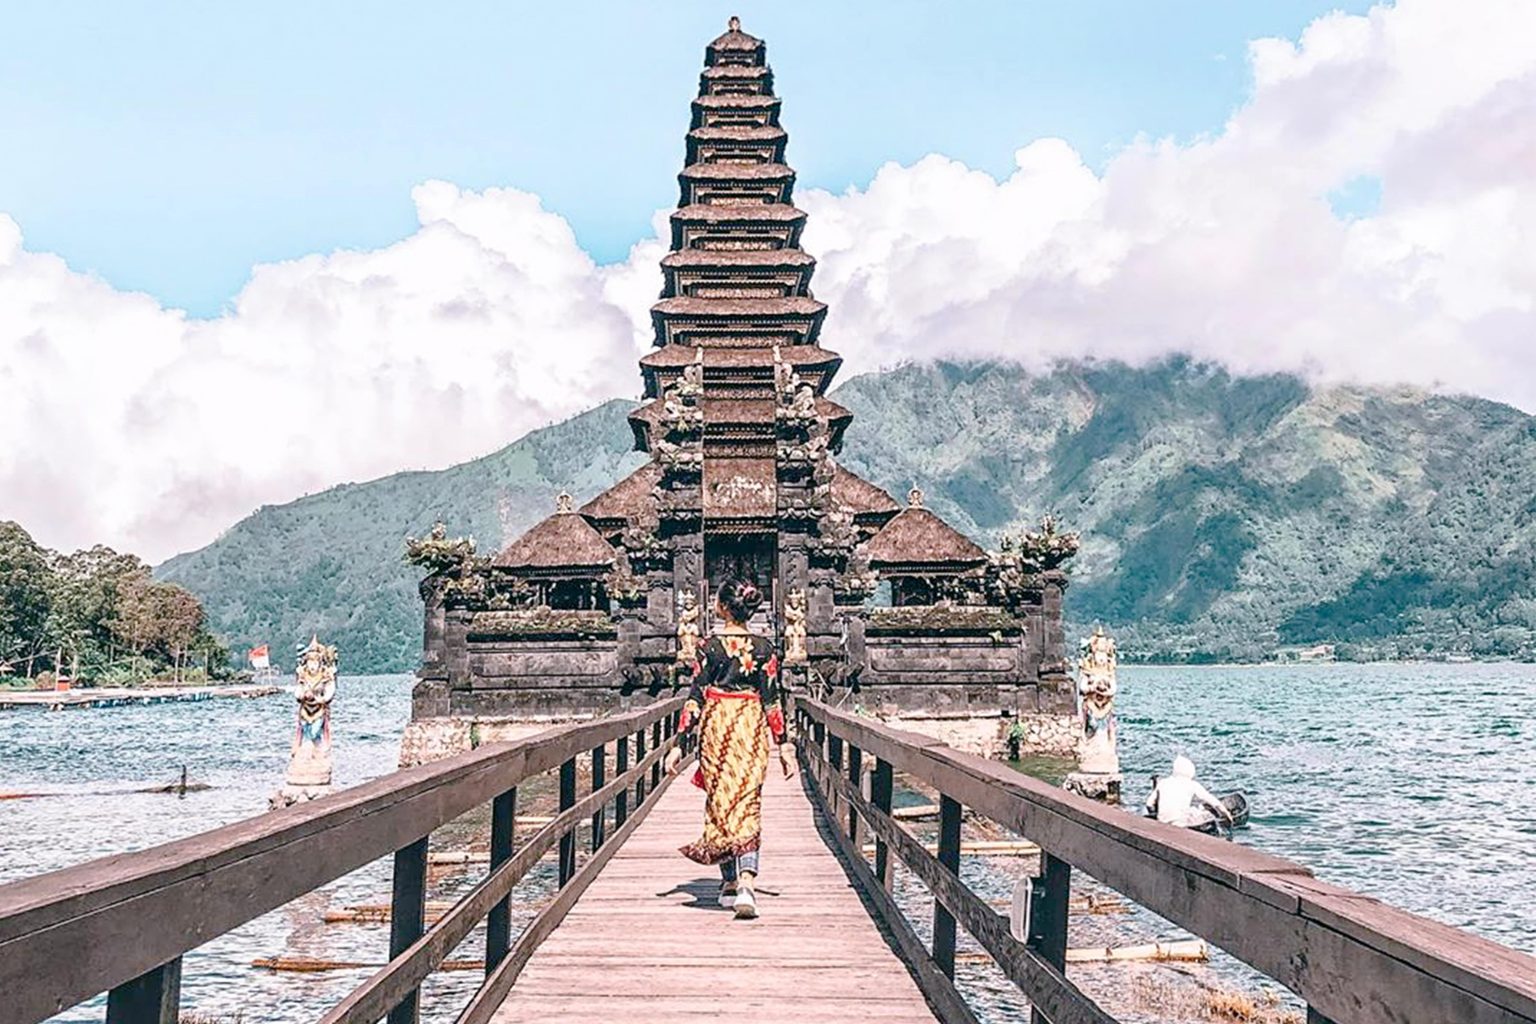 cost of travel bali